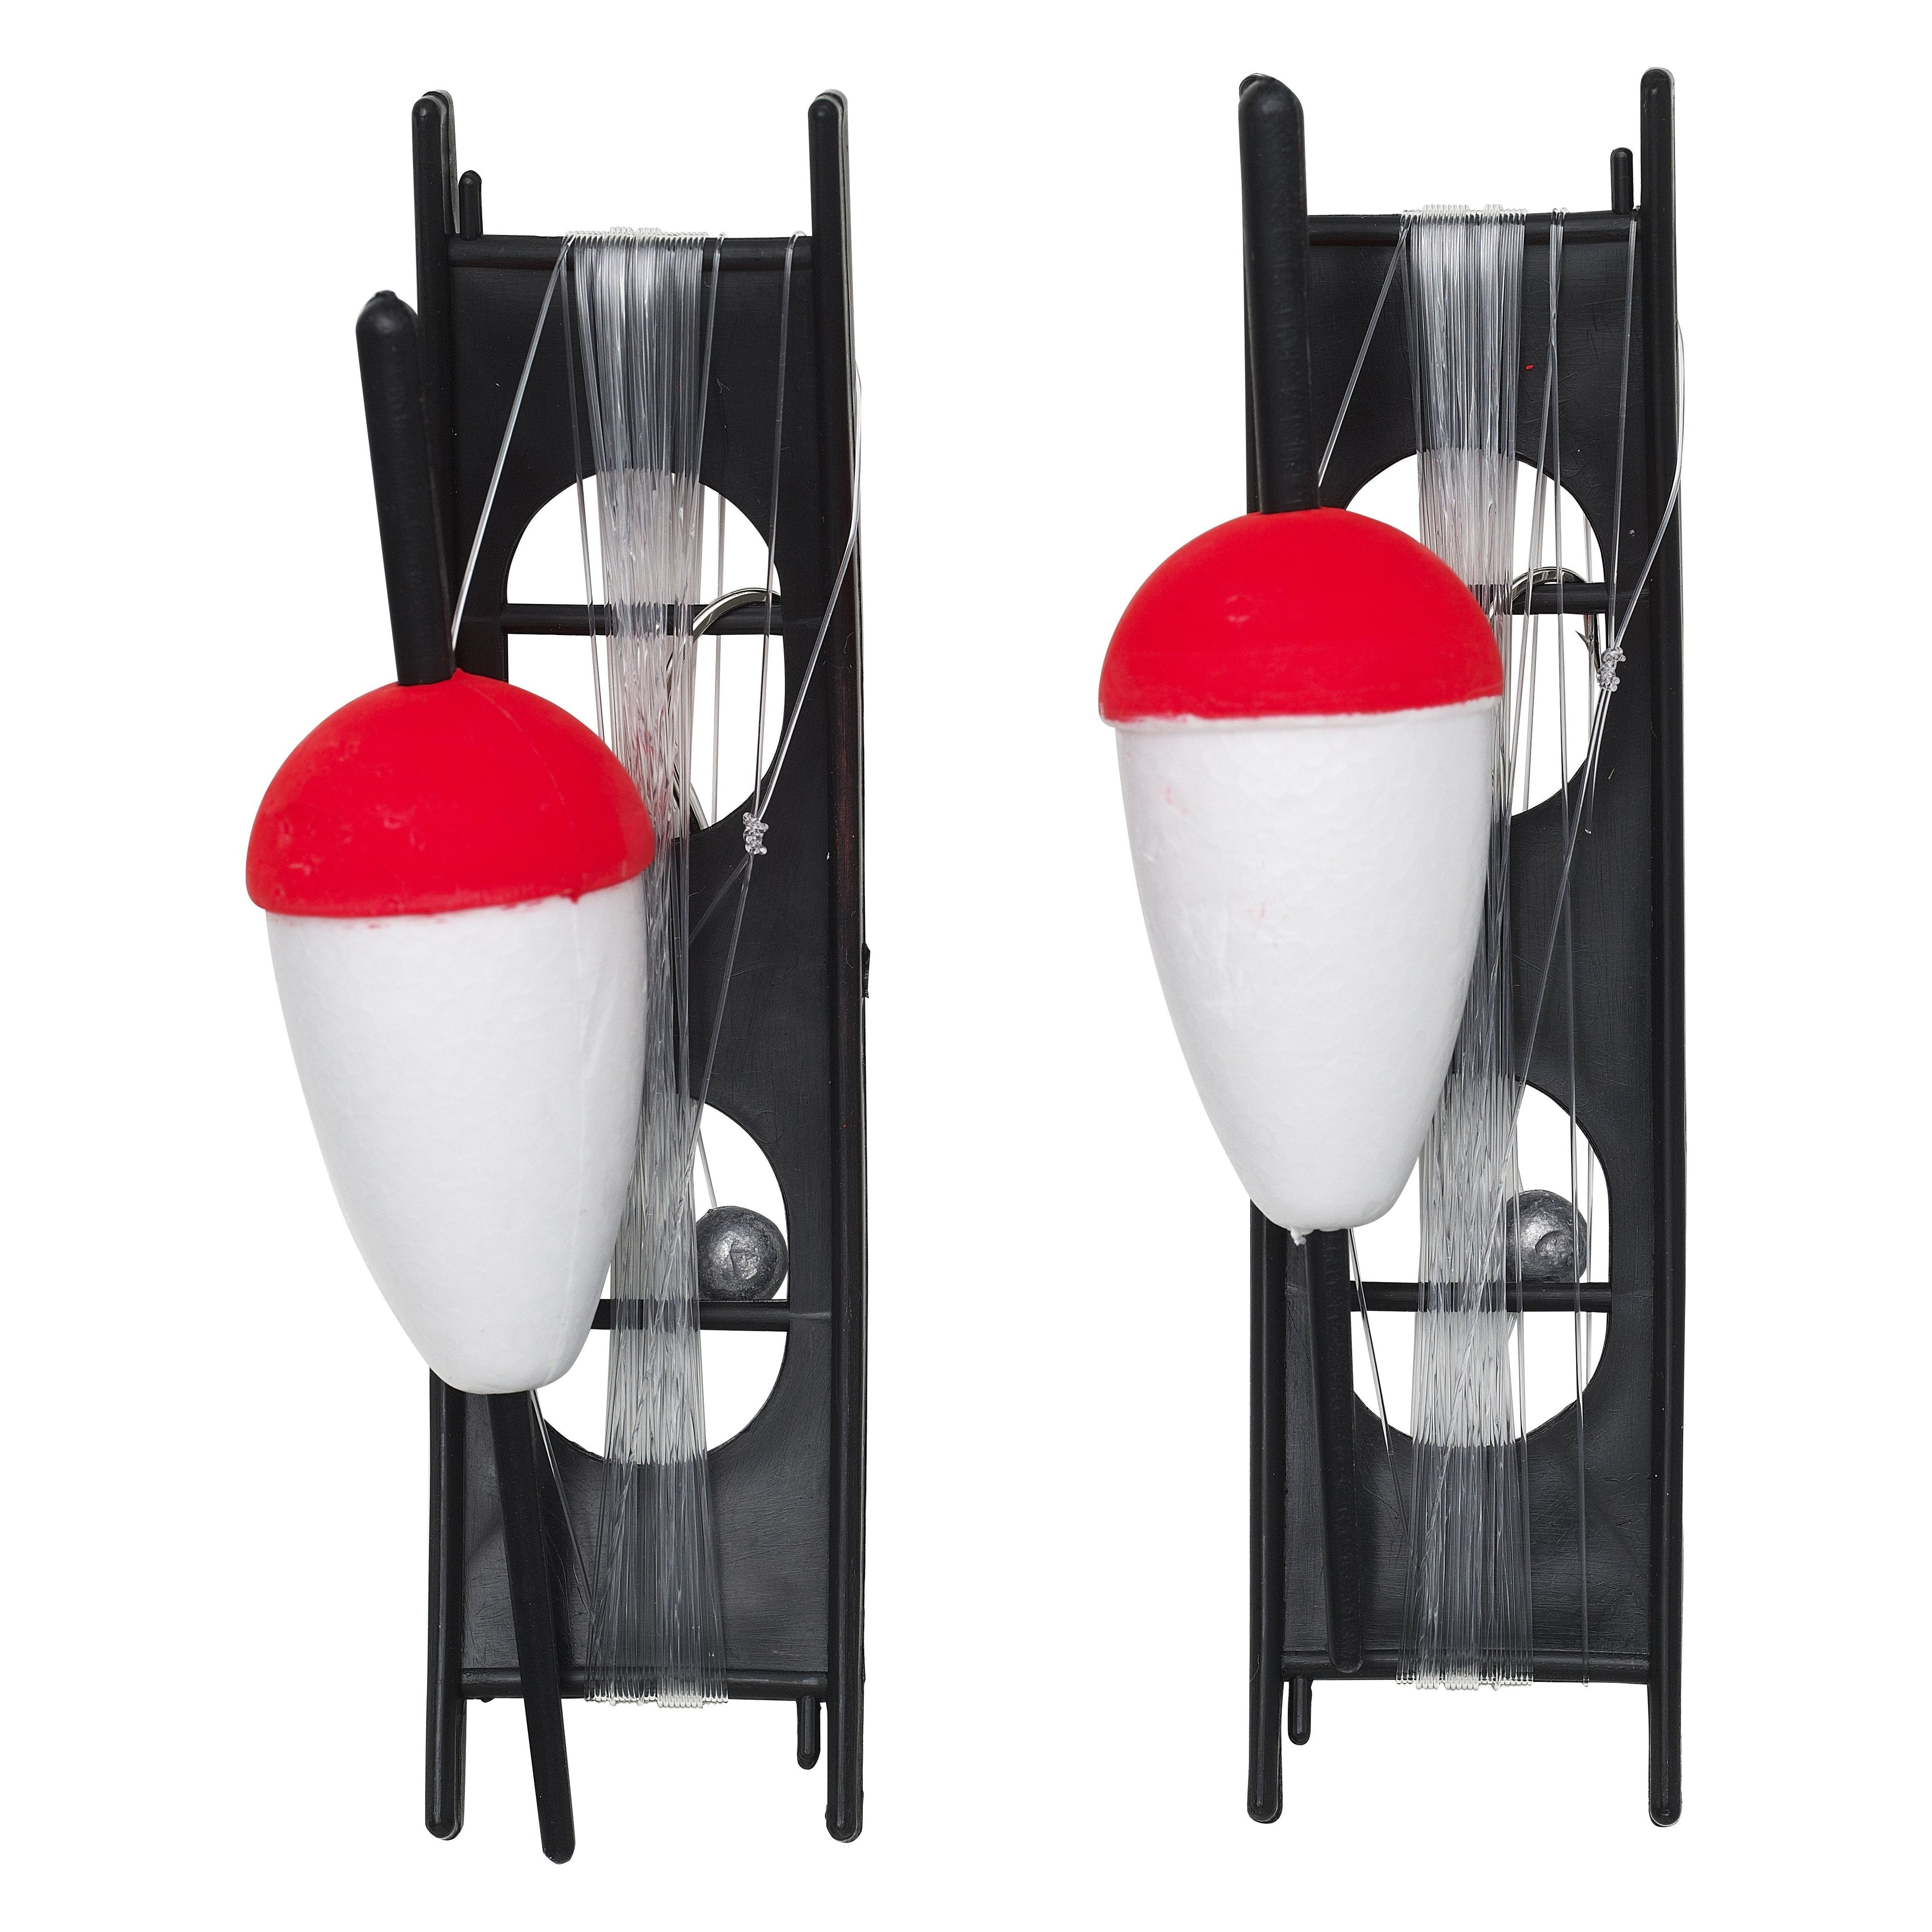 F666-228-107 KINETIC CLASSIC FLOAT KIT 20MM RED/WHITE 2PCS AT TED JOHNSONS PROBLEM SOLVED